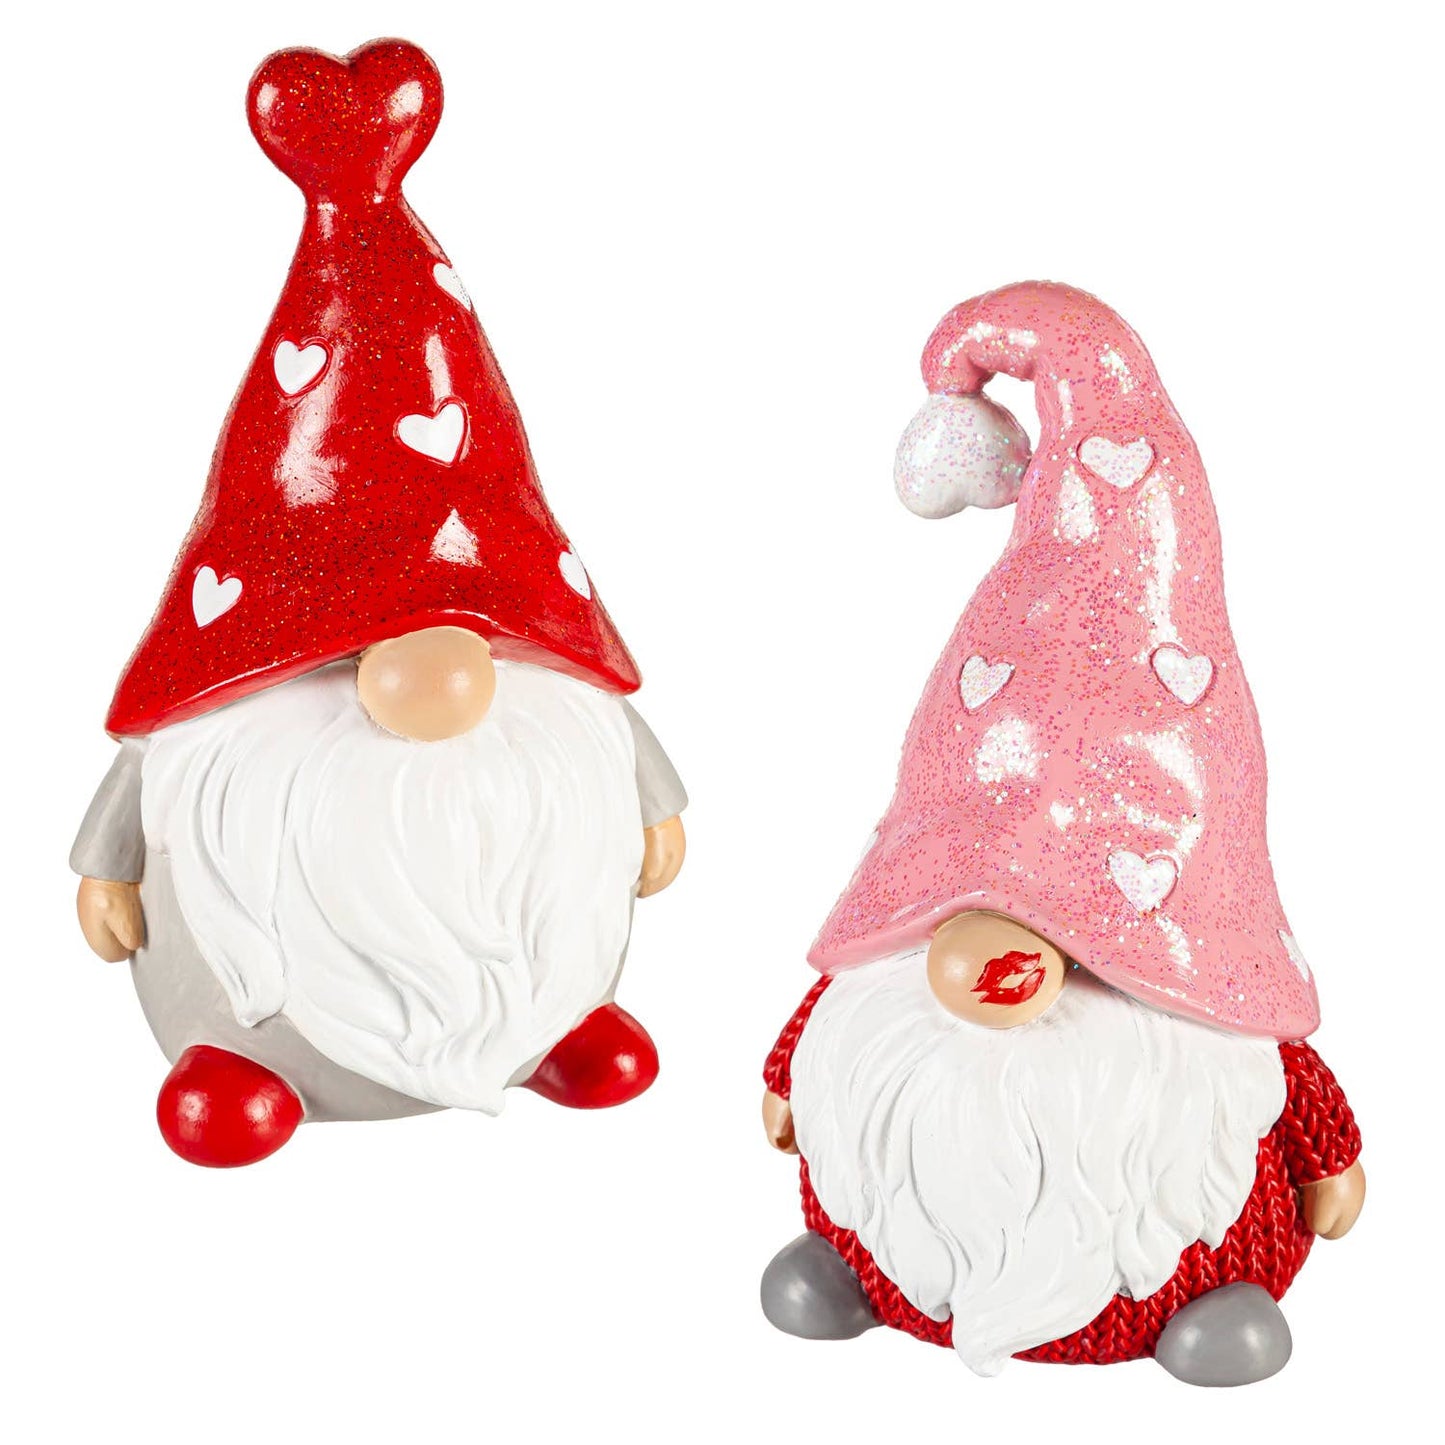 5.5" Resin Gnome with Hearts Tabletop Décor, 2 Asst